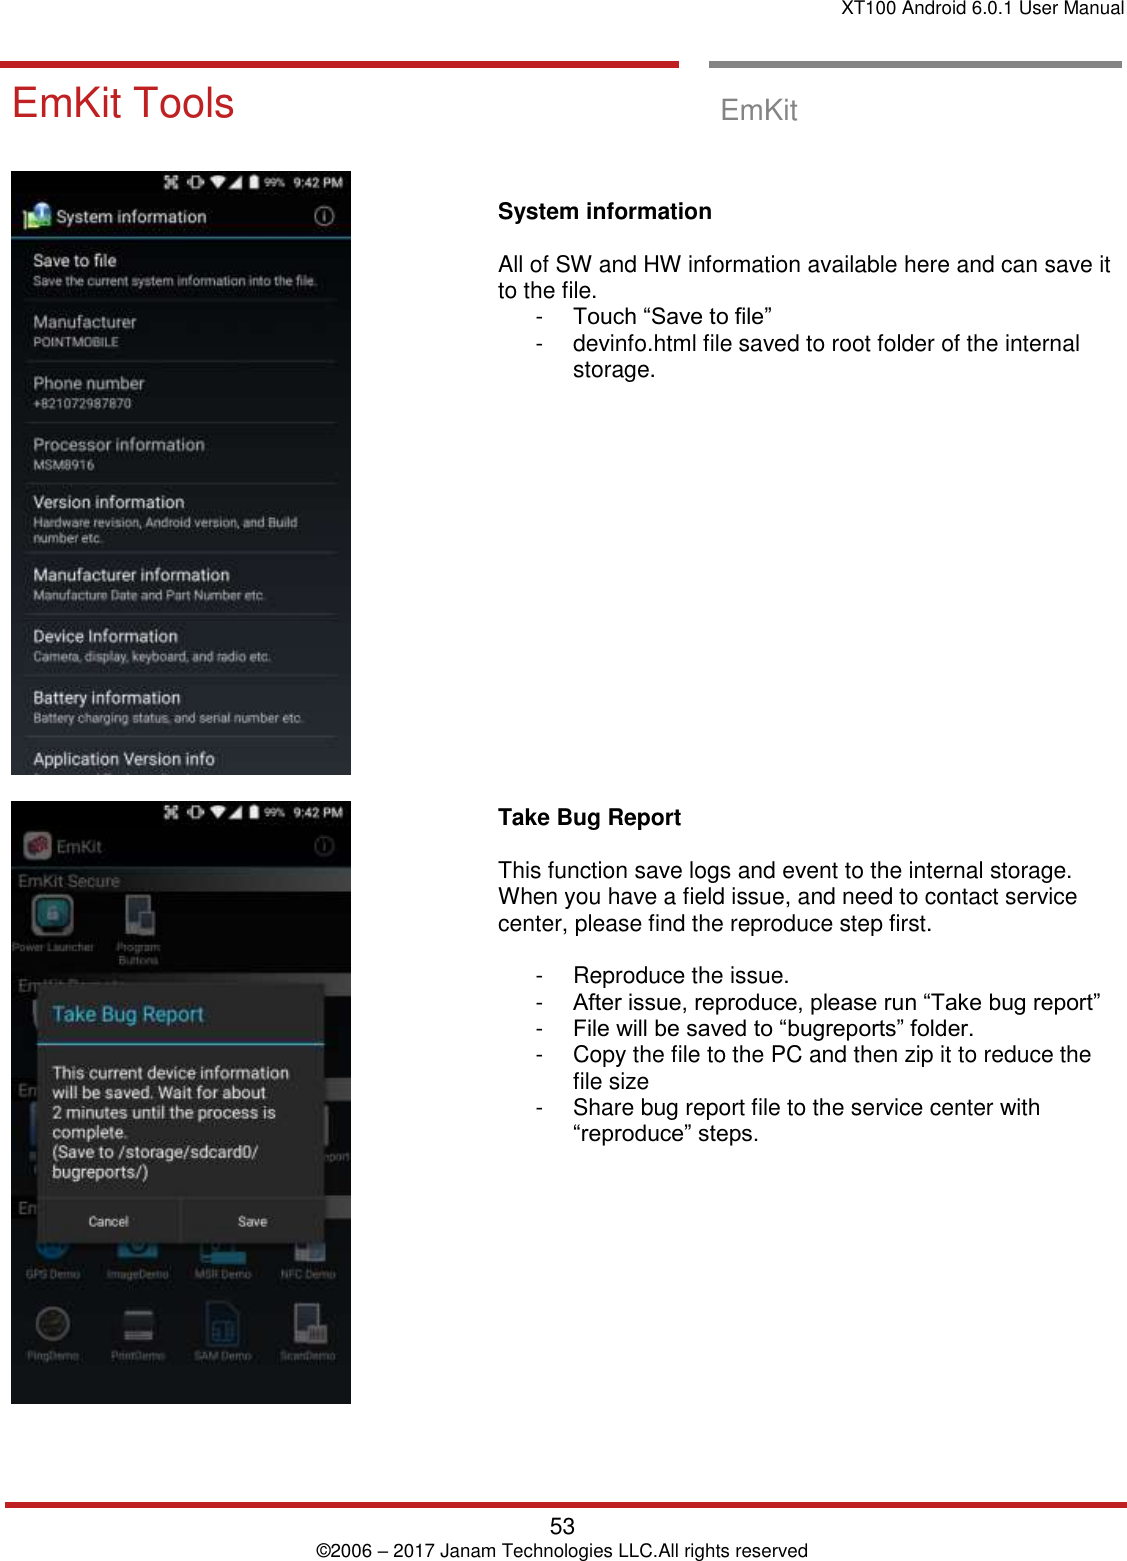 XT100 Android 6.0.1 User Manual   53 © 2006 – 2017 Janam Technologies LLC.All rights reserved  EmKit Tools EmKit Tools  EmKit        System information   All of SW and HW information available here and can save it to the file. -  Touch “Save to file”  -  devinfo.html file saved to root folder of the internal storage.                    Take Bug Report   This function save logs and event to the internal storage. When you have a field issue, and need to contact service center, please find the reproduce step first.   -  Reproduce the issue.  -  After issue, reproduce, please run “Take bug report” -  File will be saved to “bugreports” folder.  -  Copy the file to the PC and then zip it to reduce the file size -  Share bug report file to the service center with “reproduce” steps.   